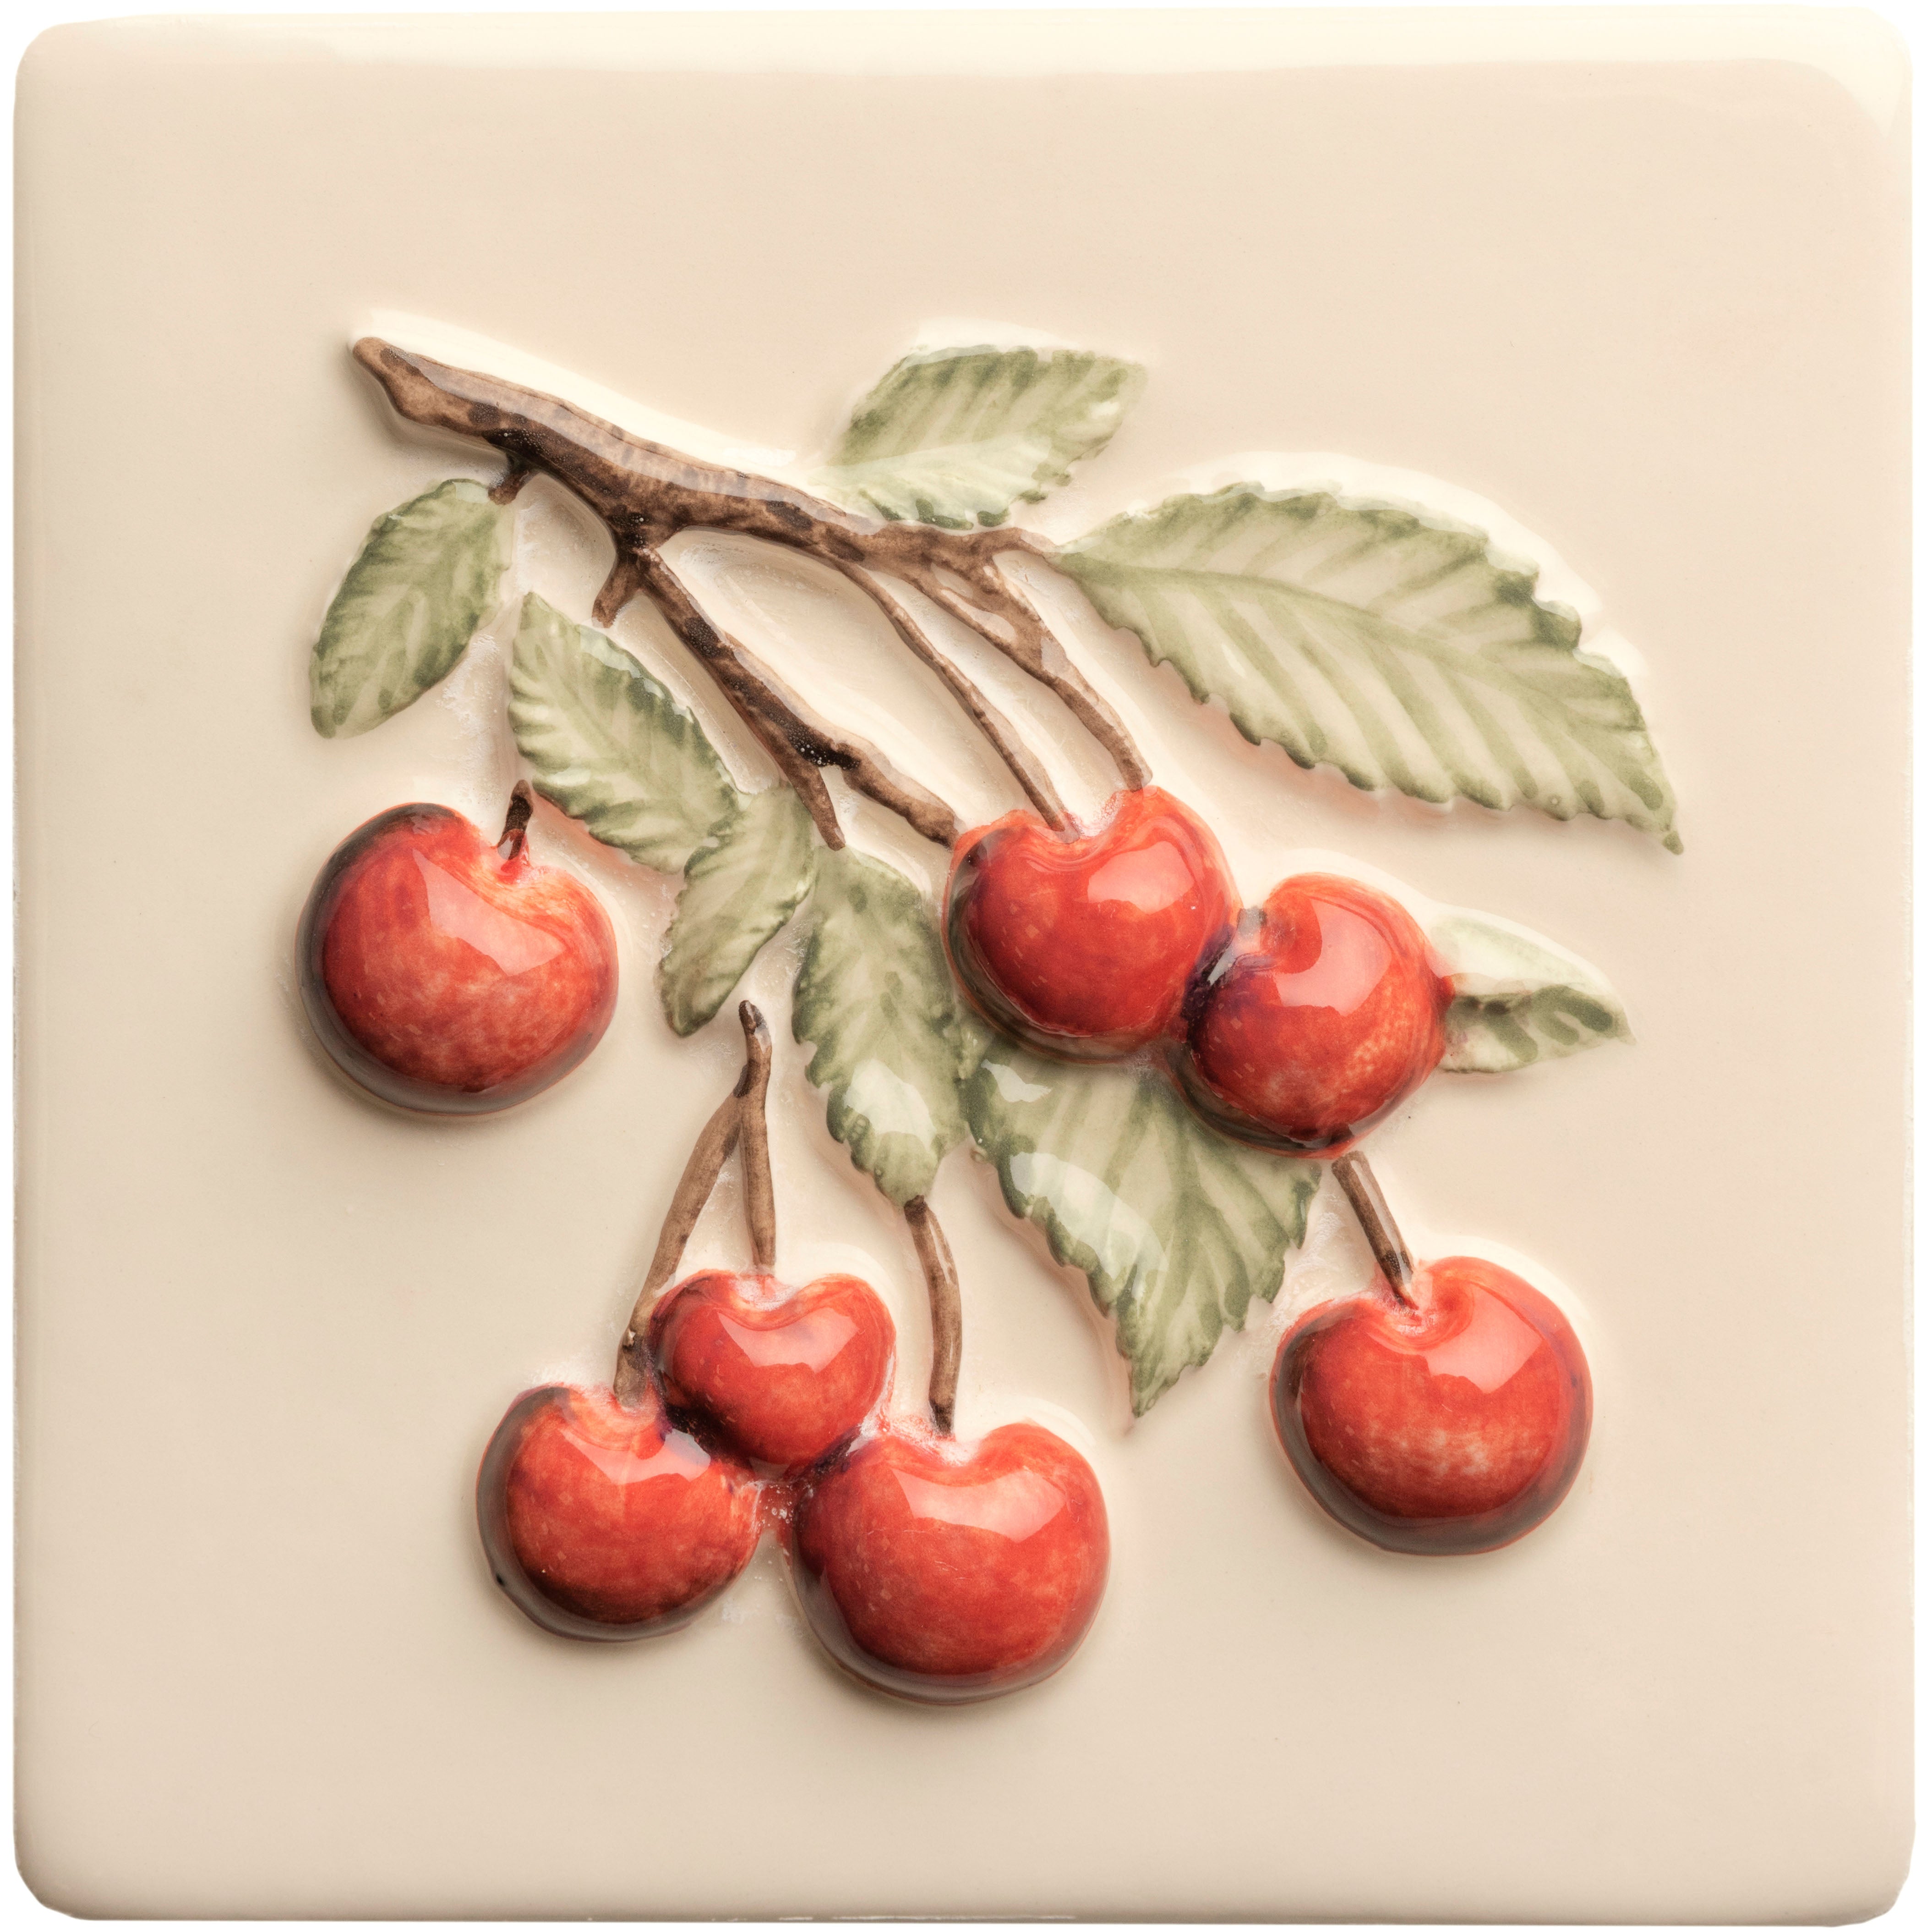 Original Style Winchester Classic Summer Fruits Handpainted Tiles